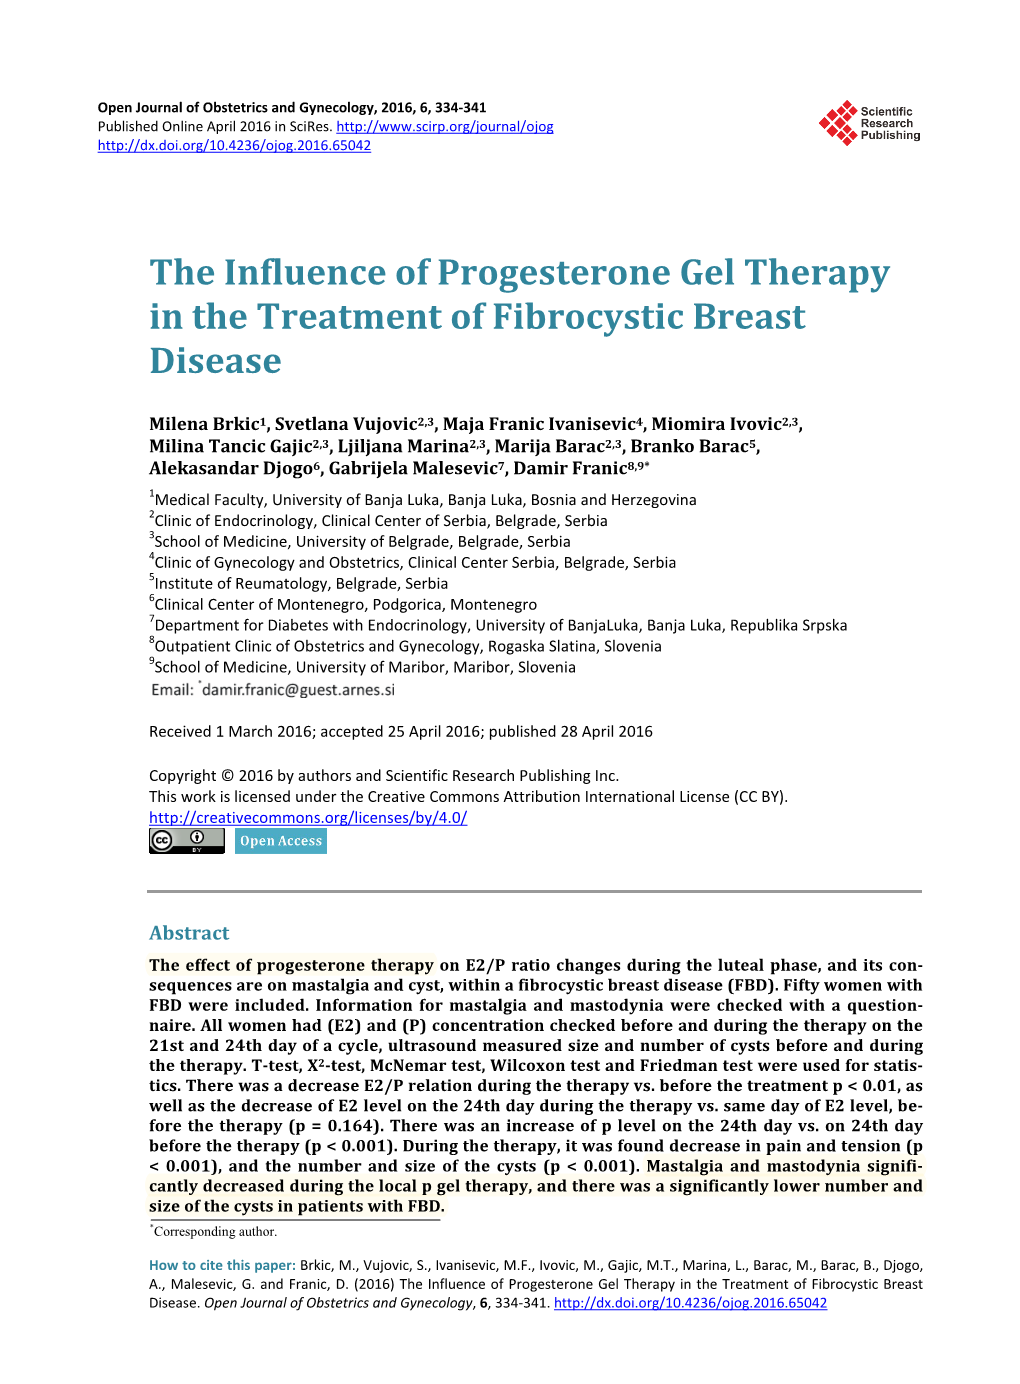 Transdermal Progesterone Therapy in the Treatment of Fibrocystic Breast